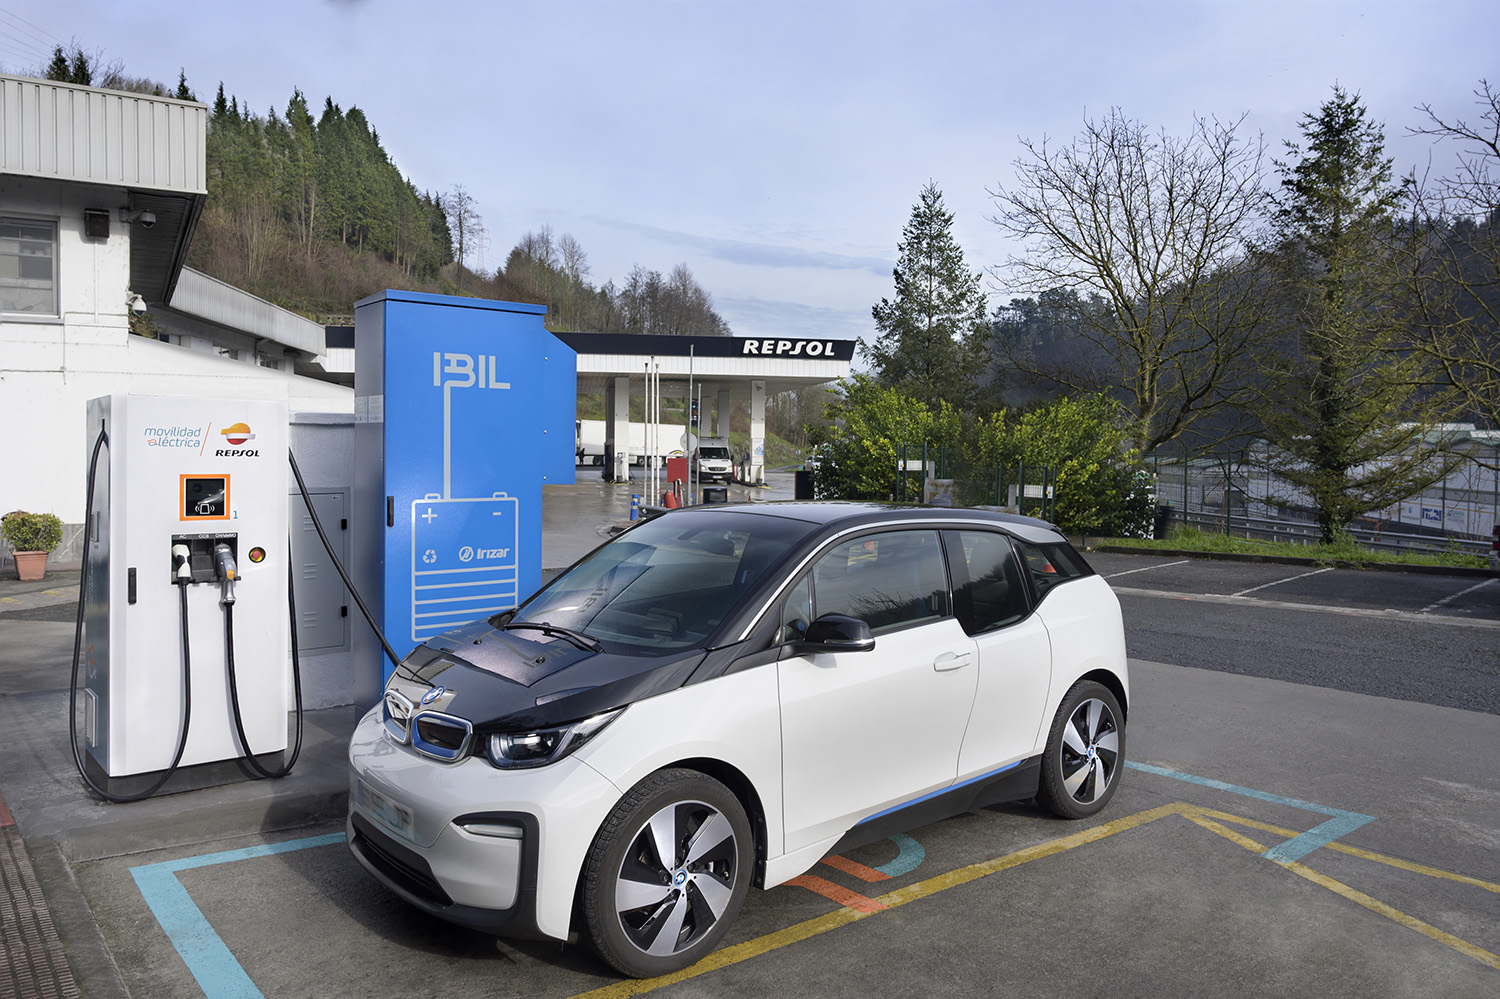 The first charging station for electric vehicles using second life batteries from Irizar e-mobility is in service